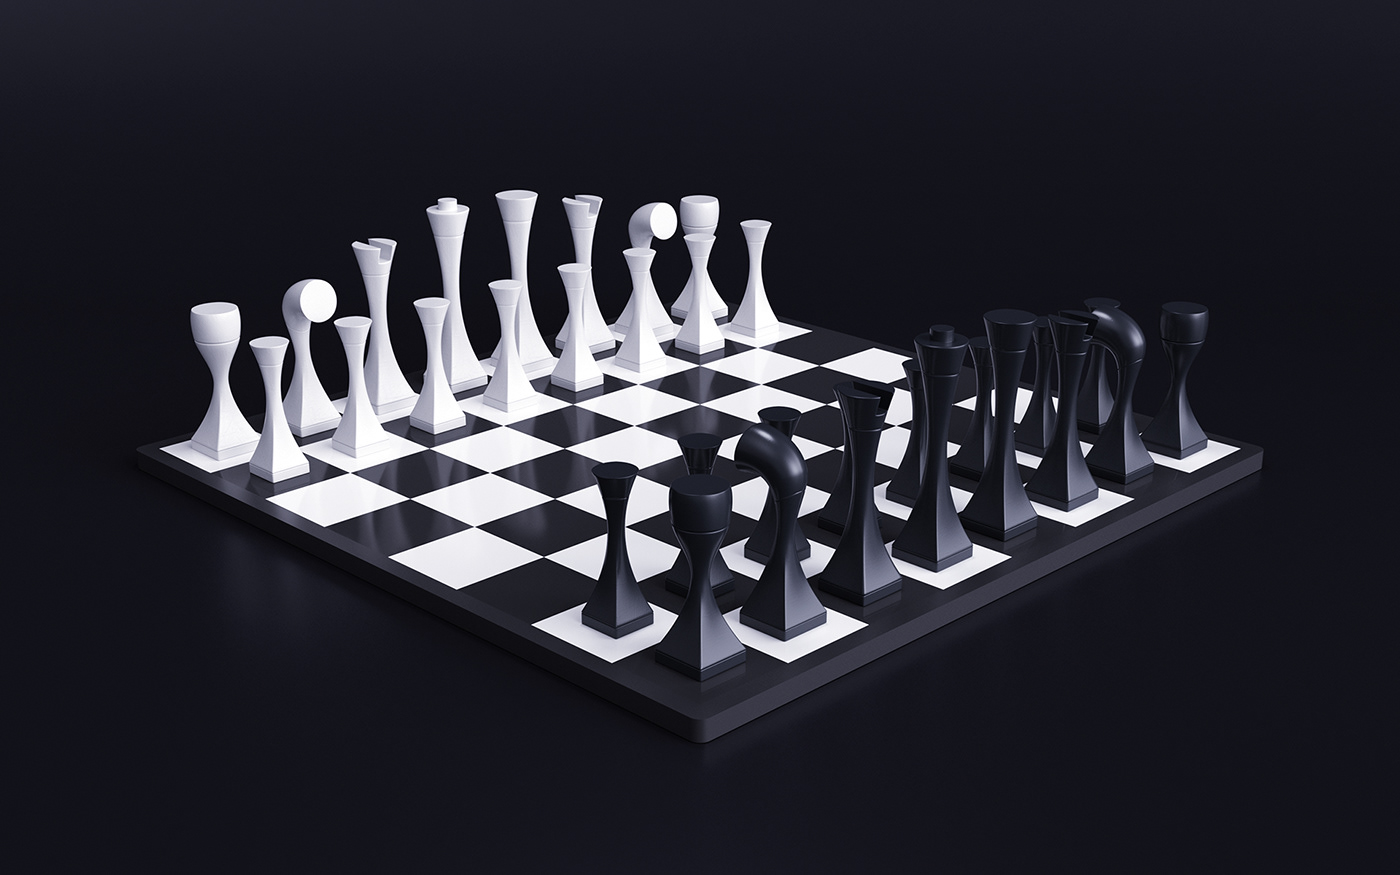 webshocker chess game 3D Render product product design  chess pieces chess set chessboard